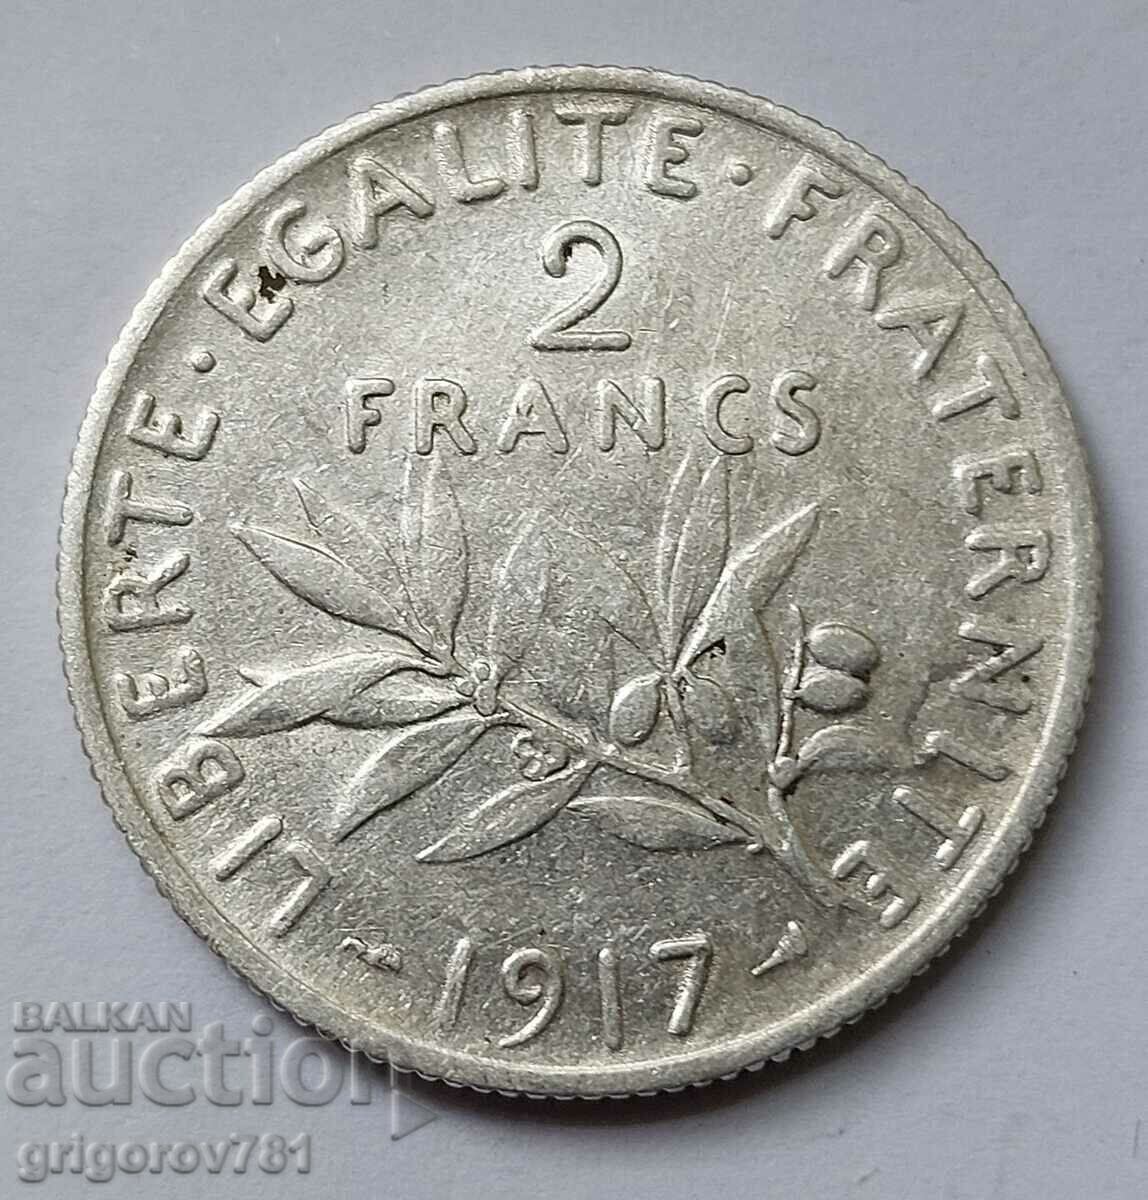 2 Francs Silver France 1917 - Silver Coin #106